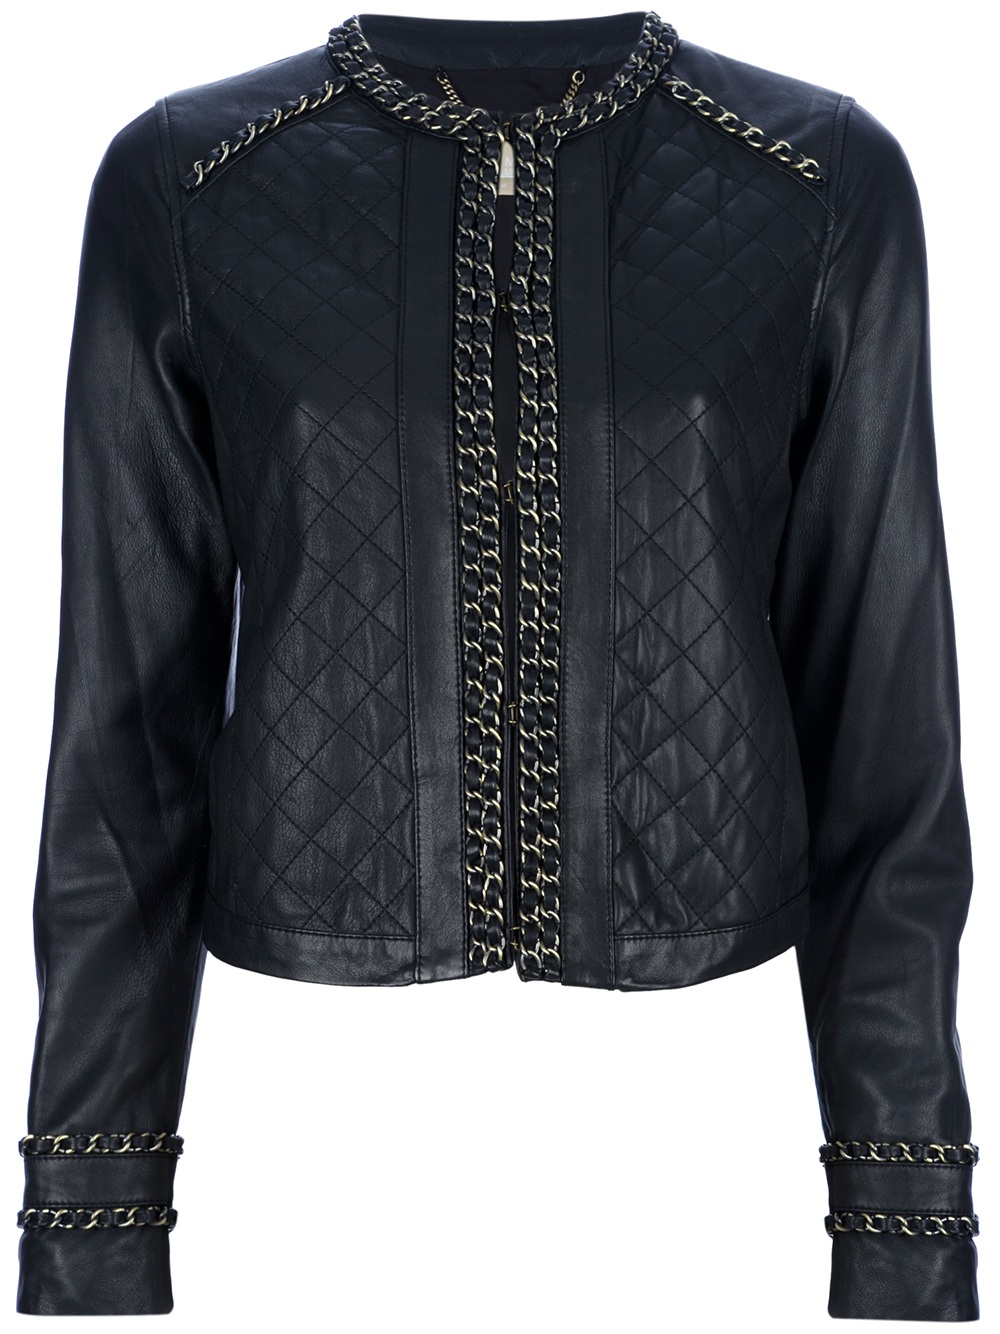 Michael kors Chain Detailed Leather Jacket in Black | Lyst